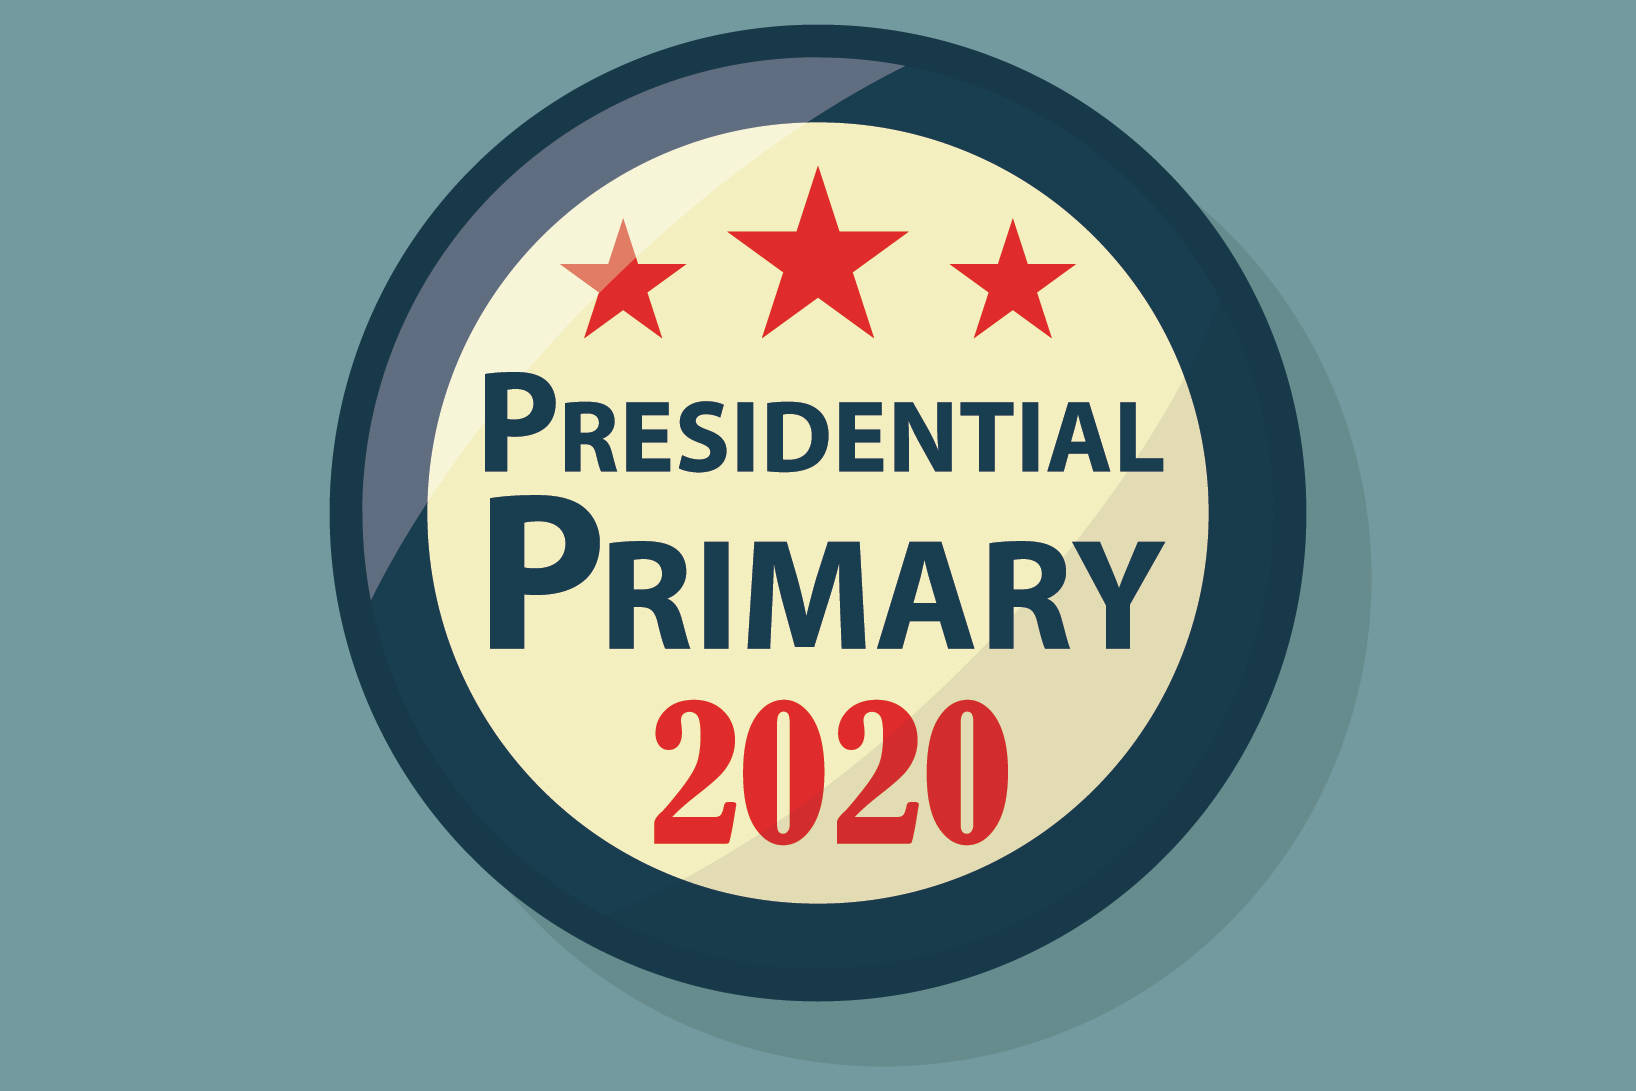 Washington’s Presidential Primary has moved to March